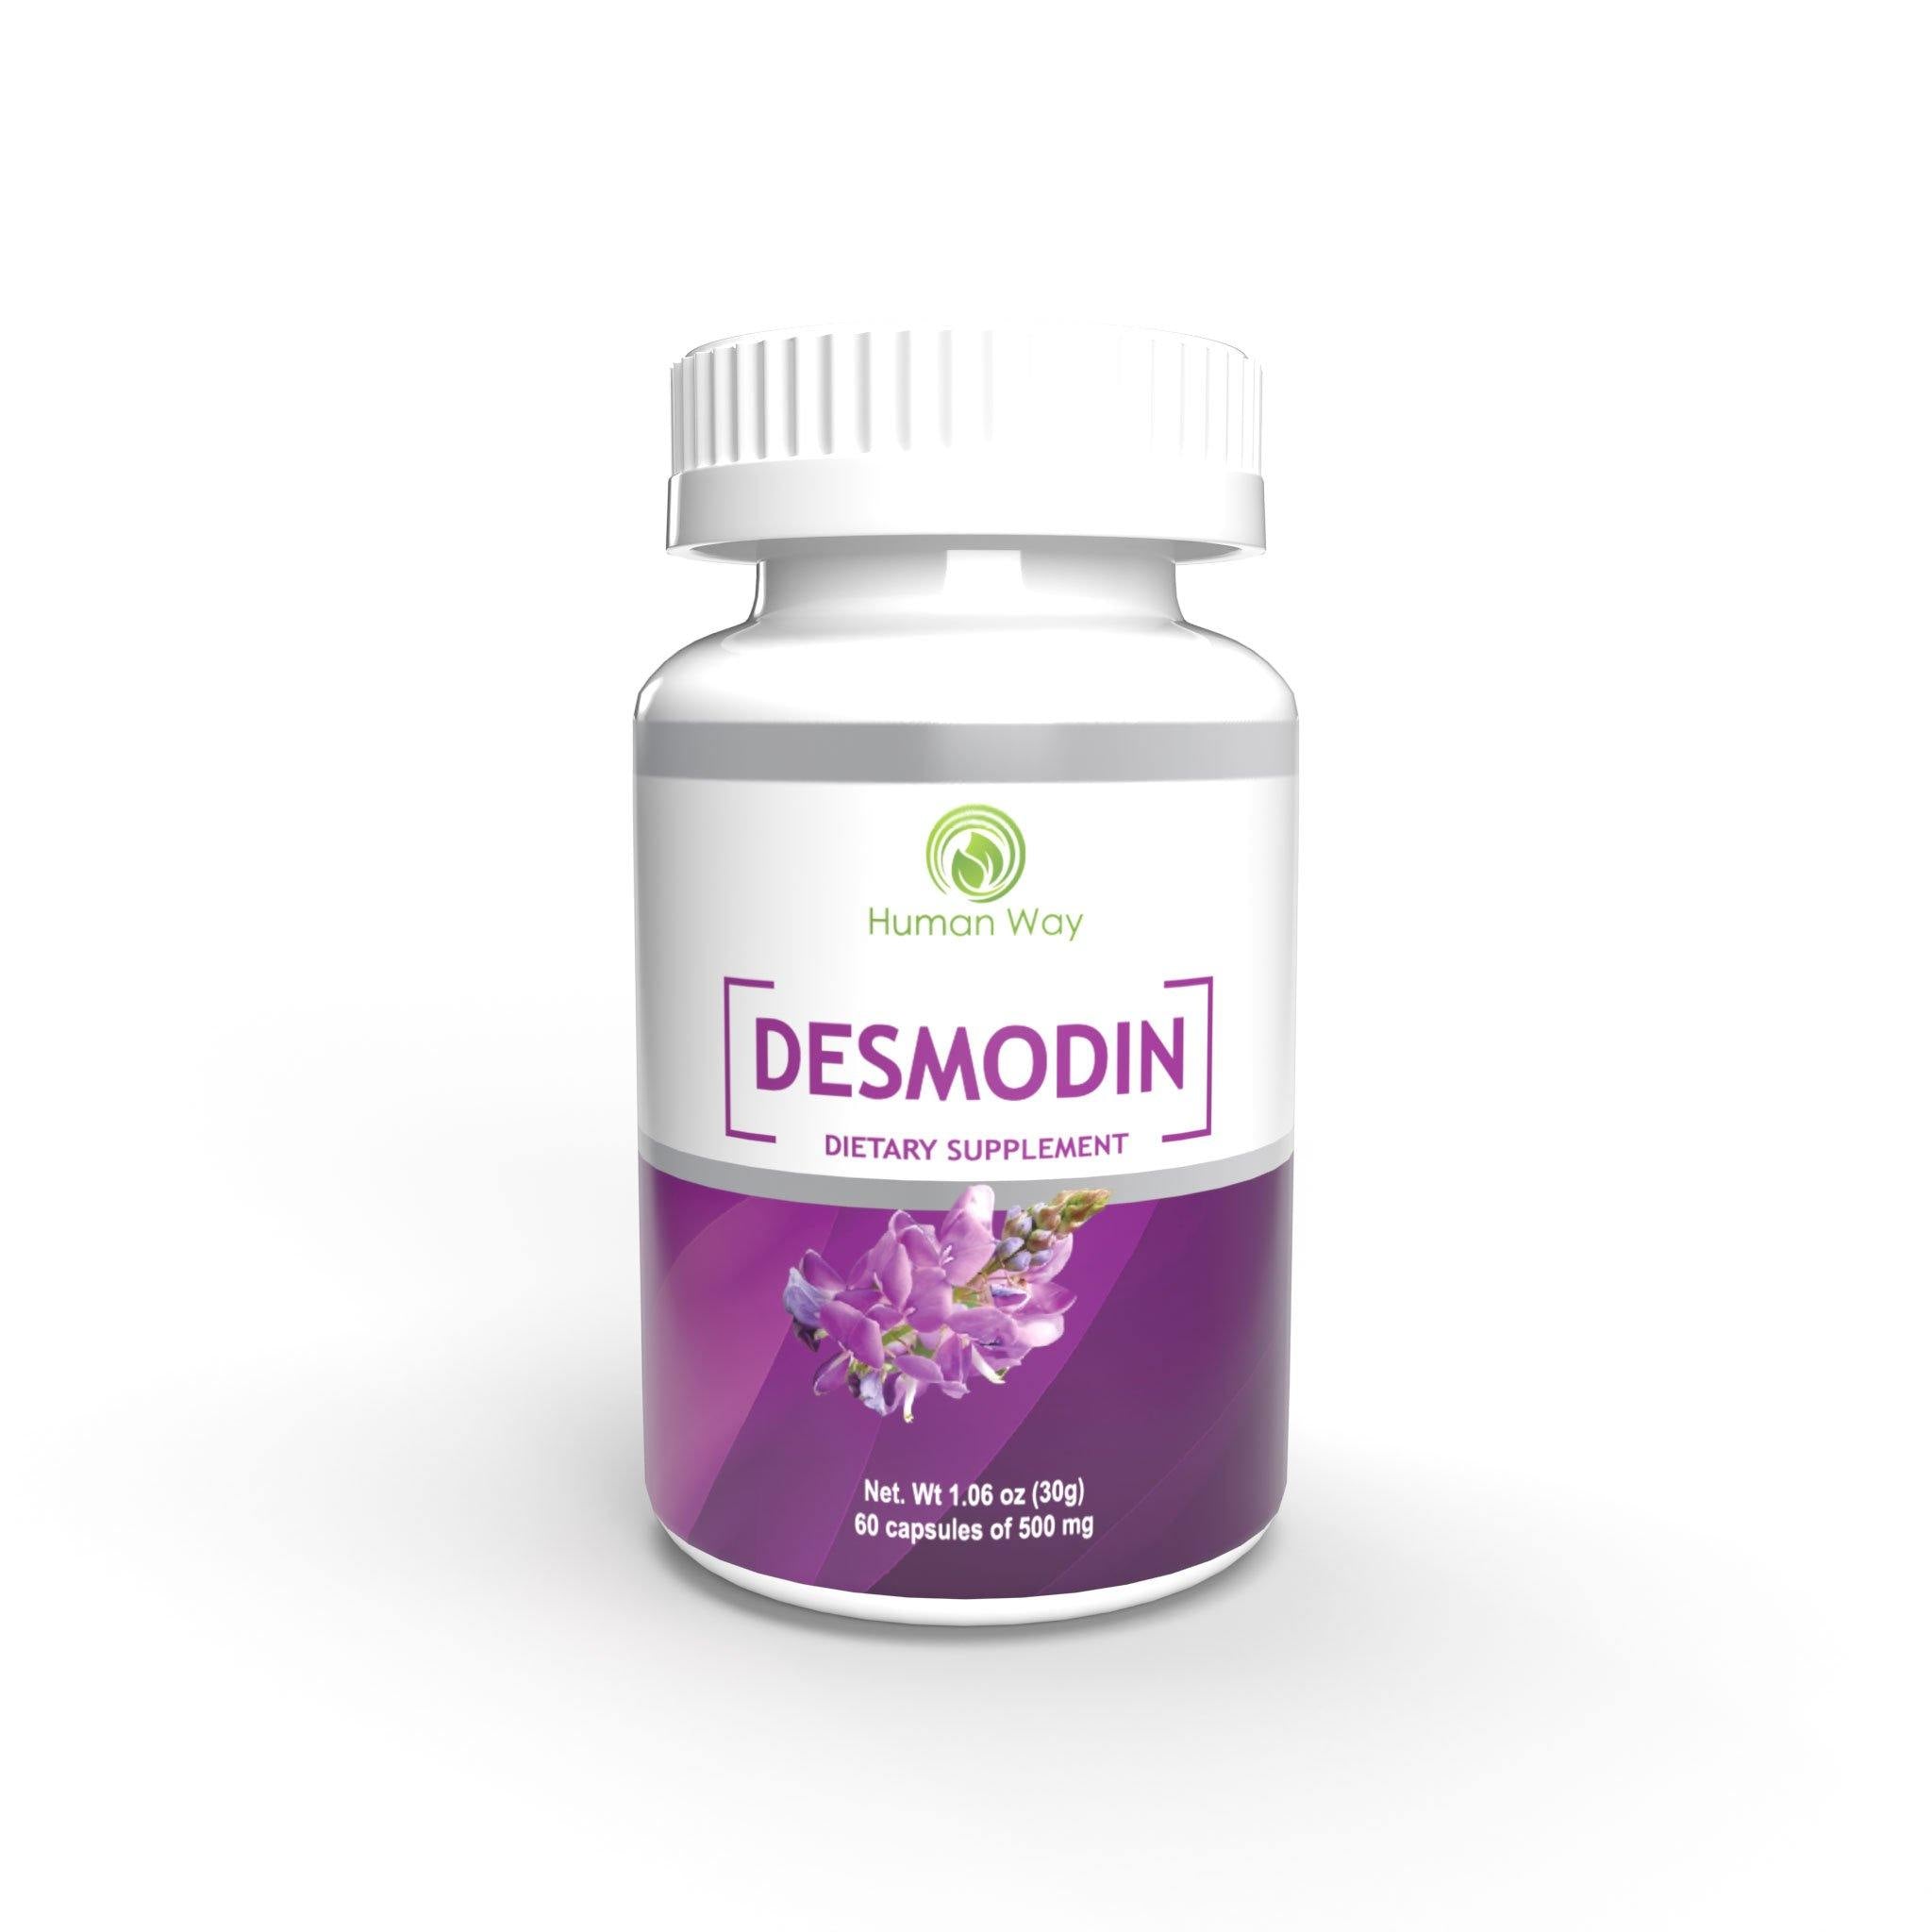 Desmodium is formulated from the leaves of the plant, which facilitates the elimination of toxins and helps the liver to function properly